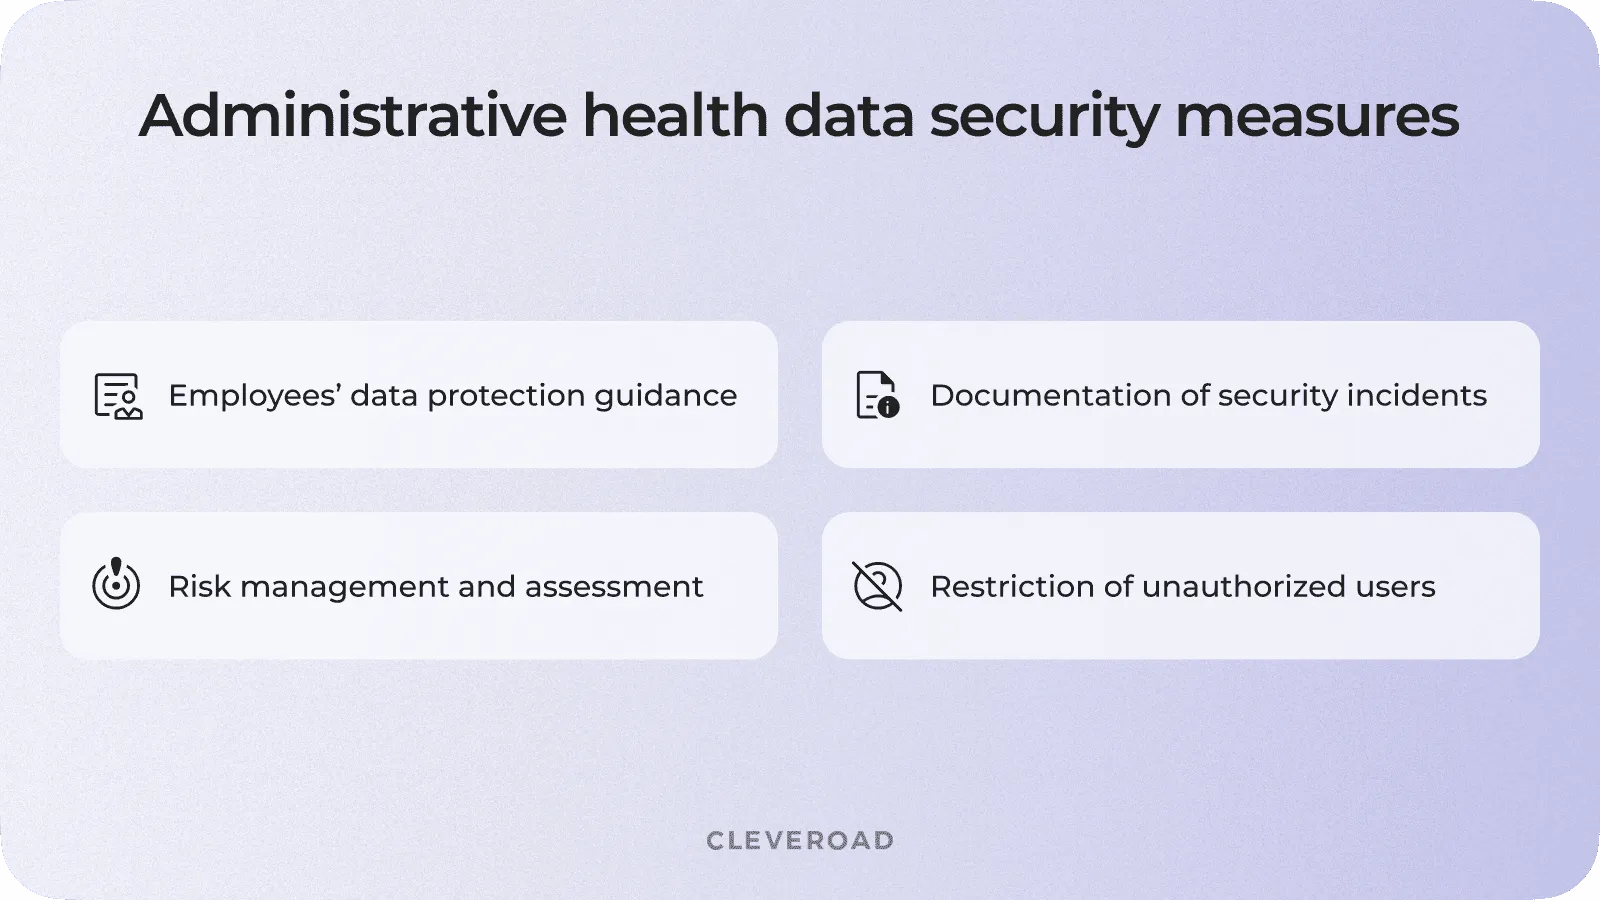 Administrative healthcare data security measures